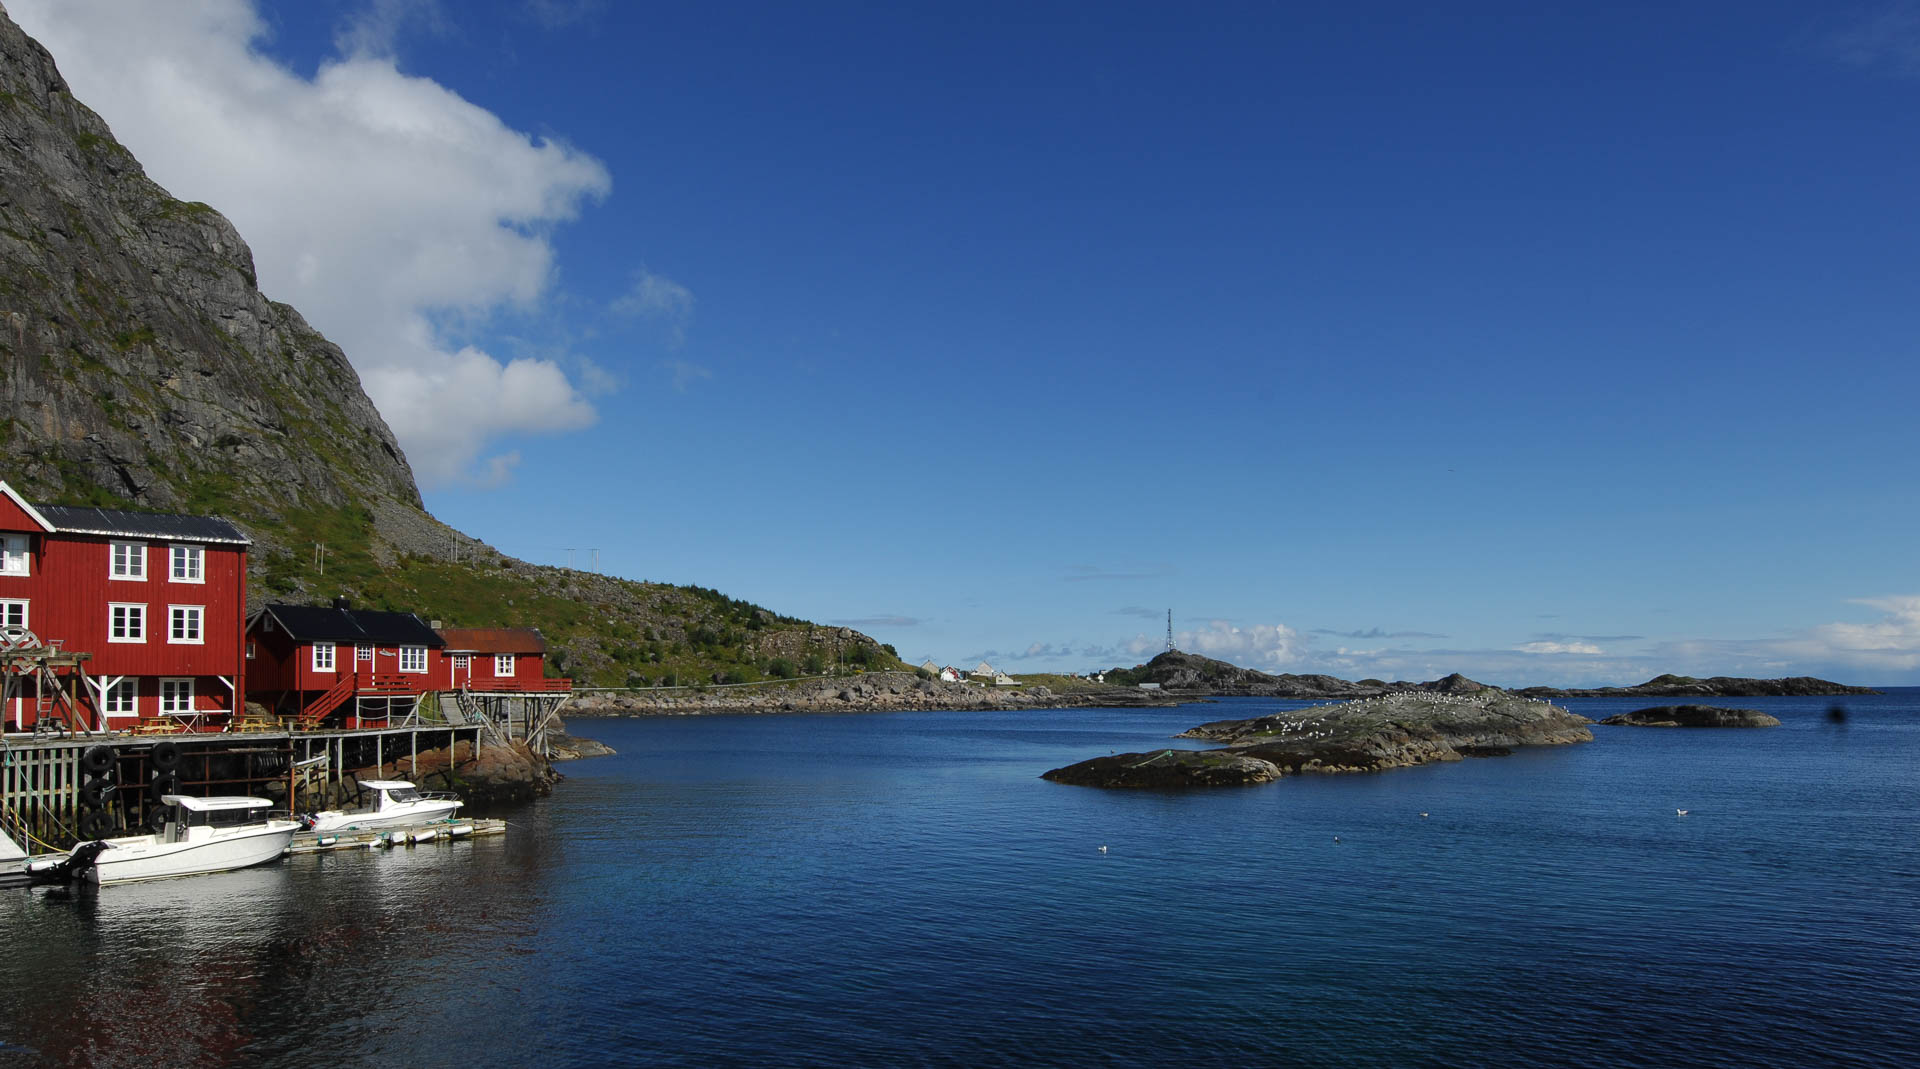 Å (name of the town), old fishing huts, today some are used as rooms for tourists